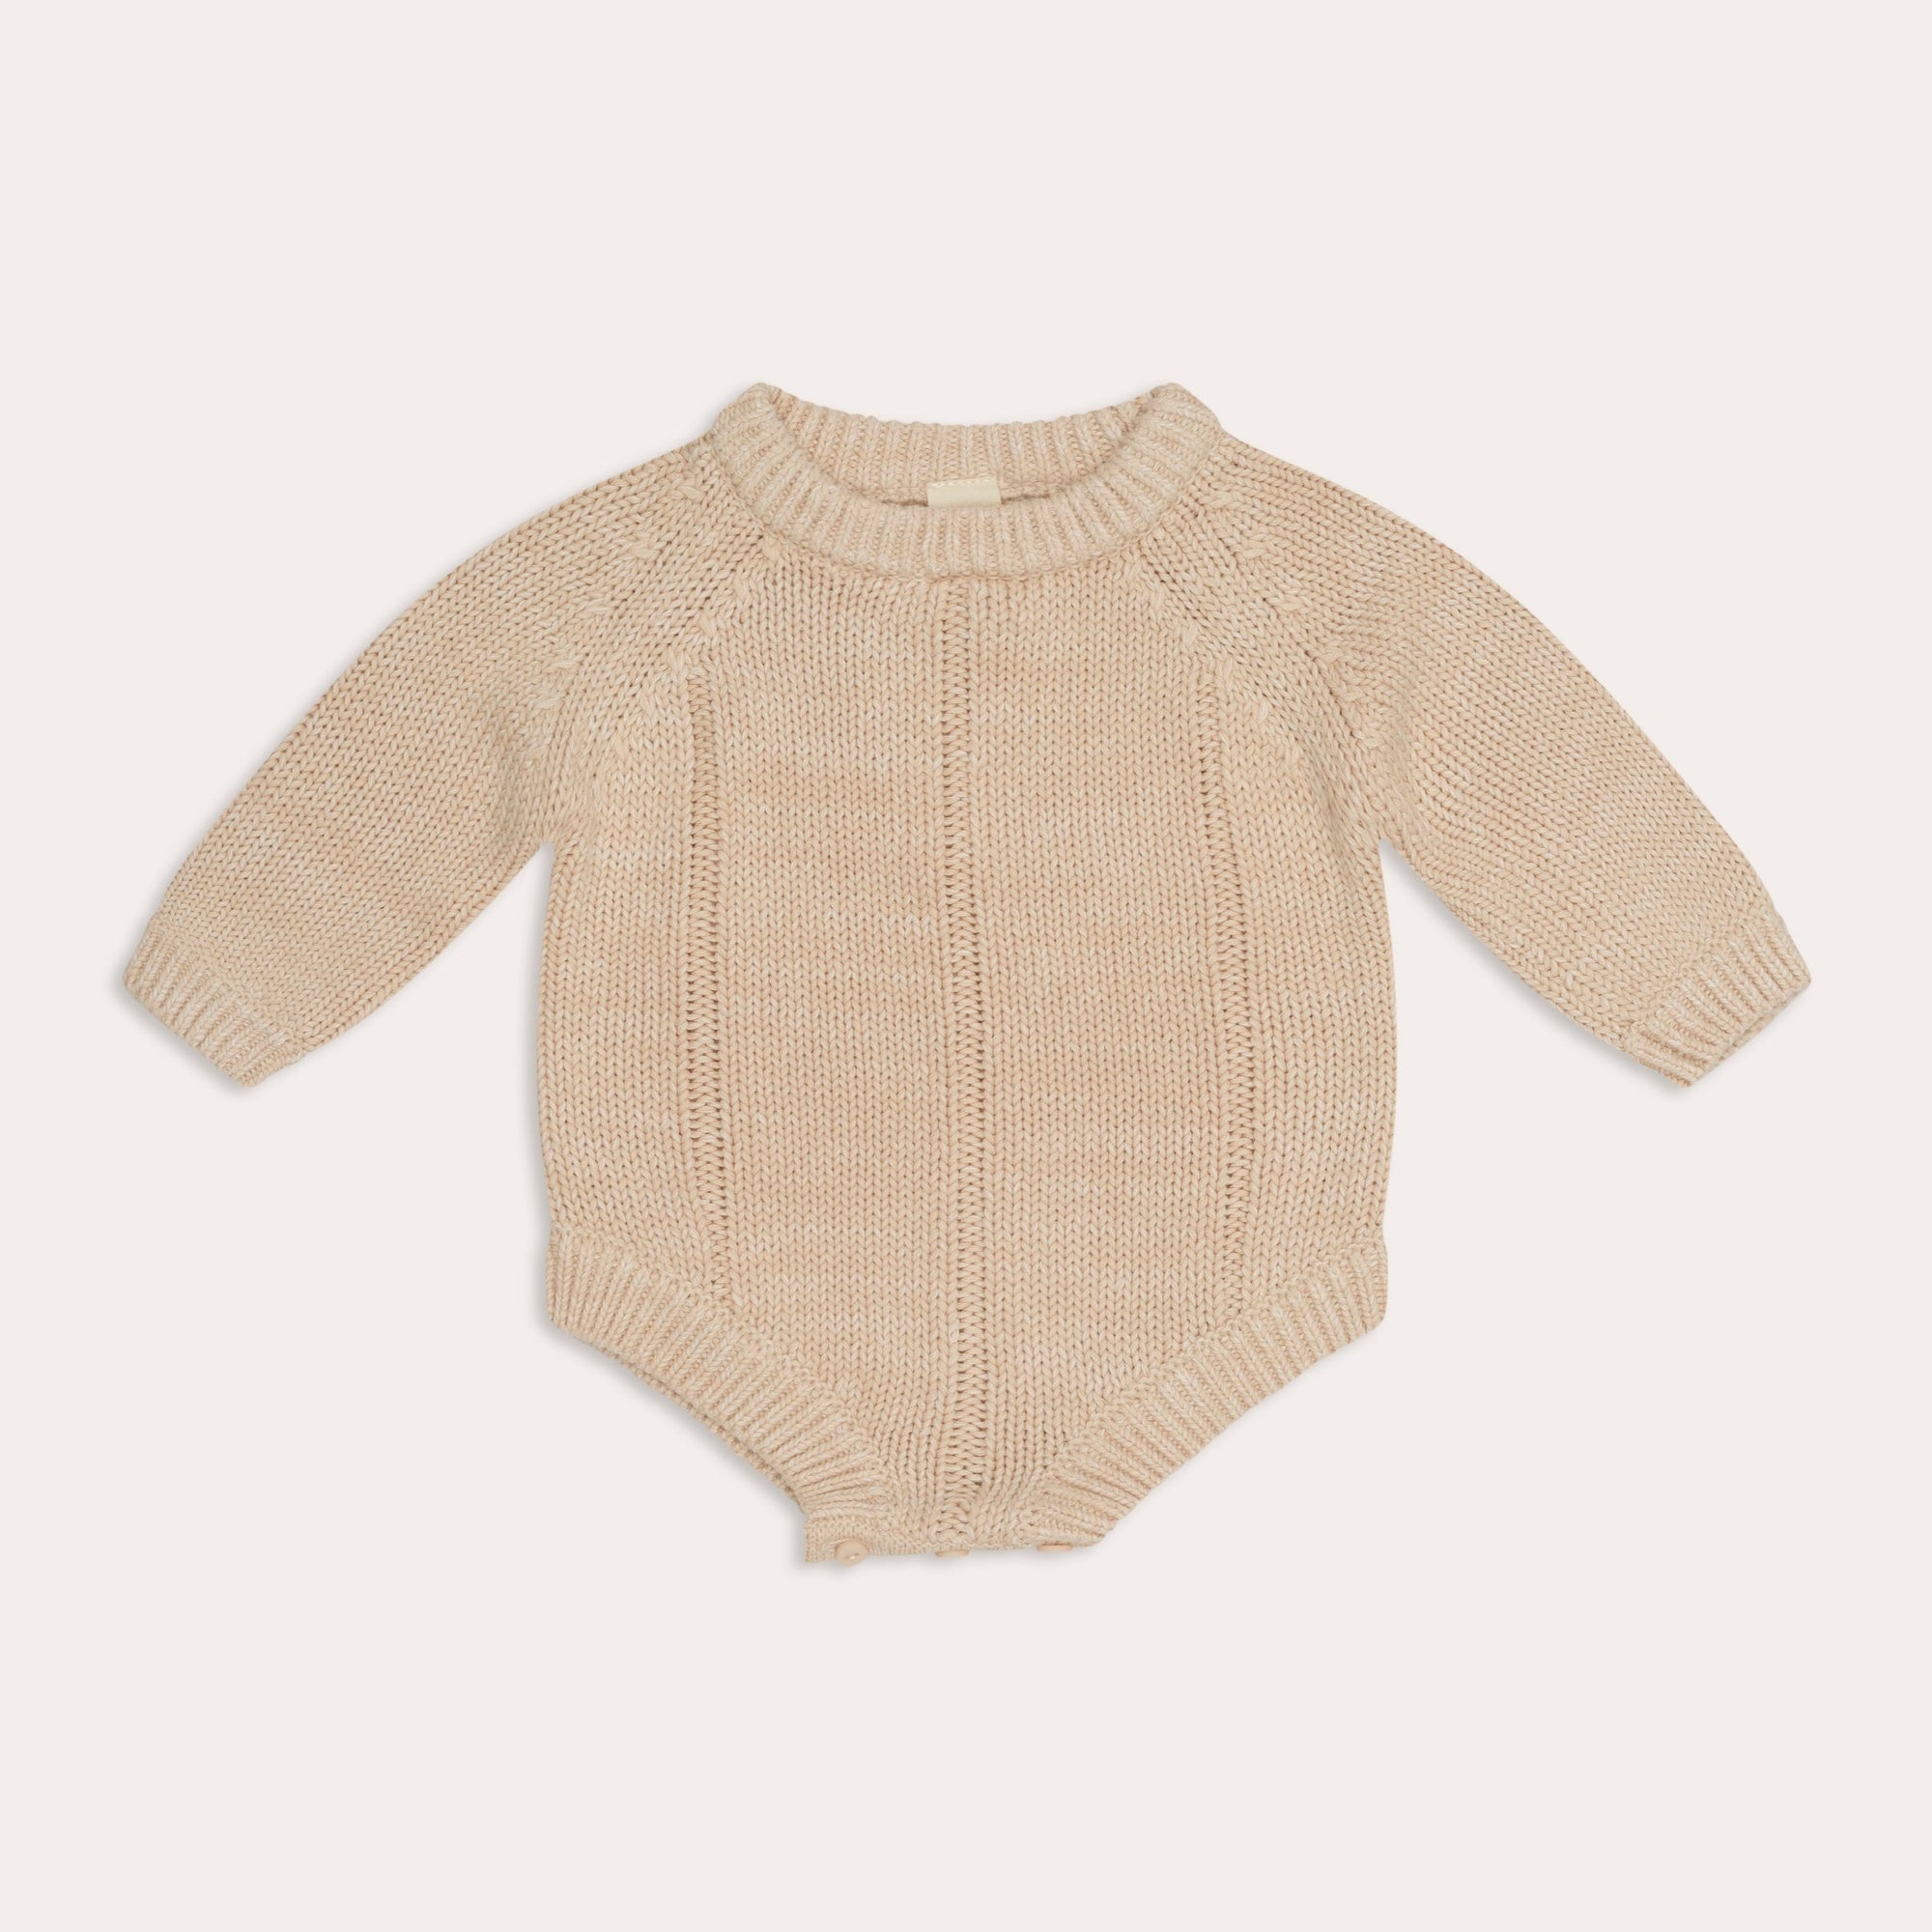 An illoura tallow knit romper in sand by Illoura the Label.